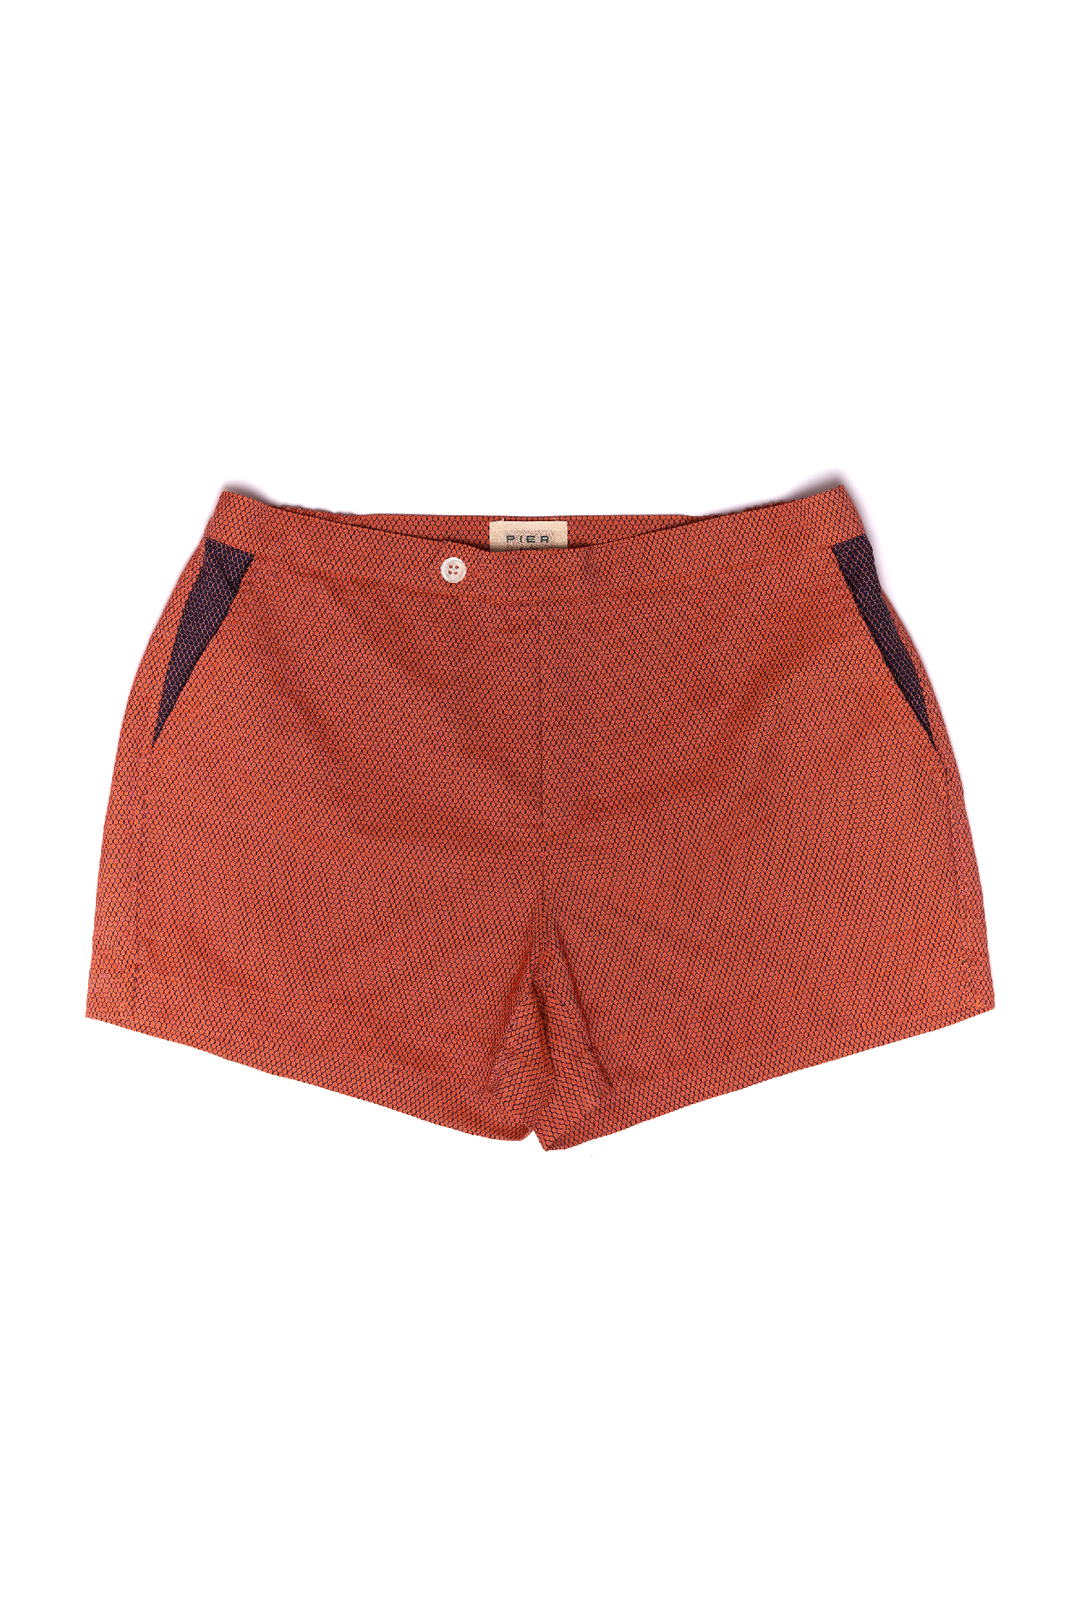 Red patterned men's shorts with button detail and side pockets